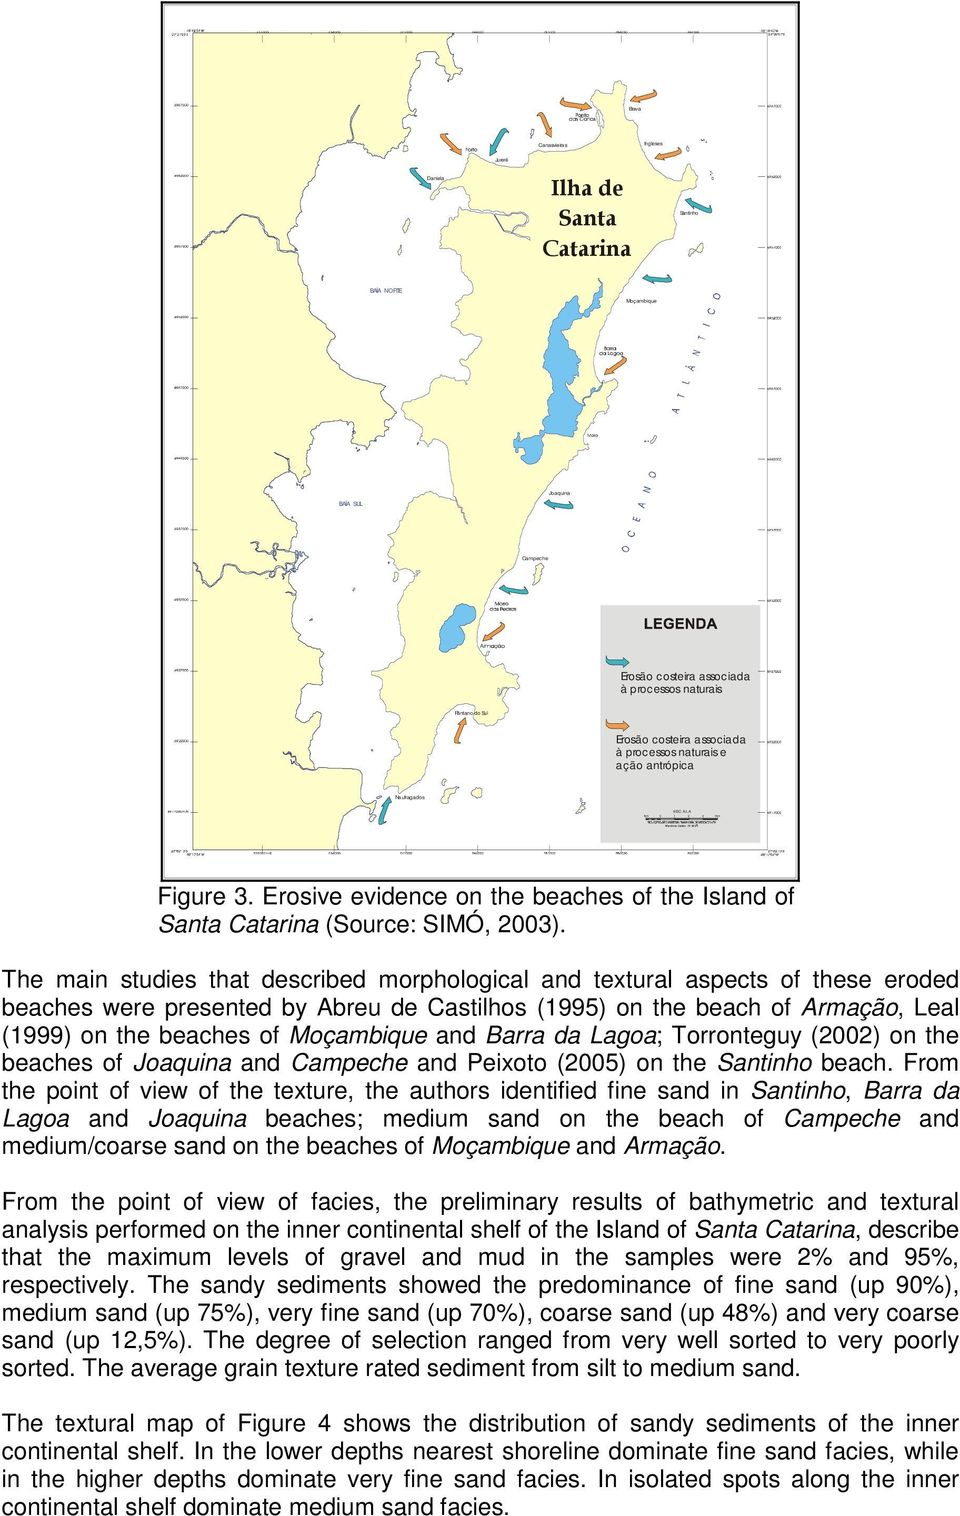 The main studies that described morphological and textural aspects of these eroded beaches were presented by Abreu de Castilhos (1995) on the beach of Armação, Leal (1999) on the beaches of